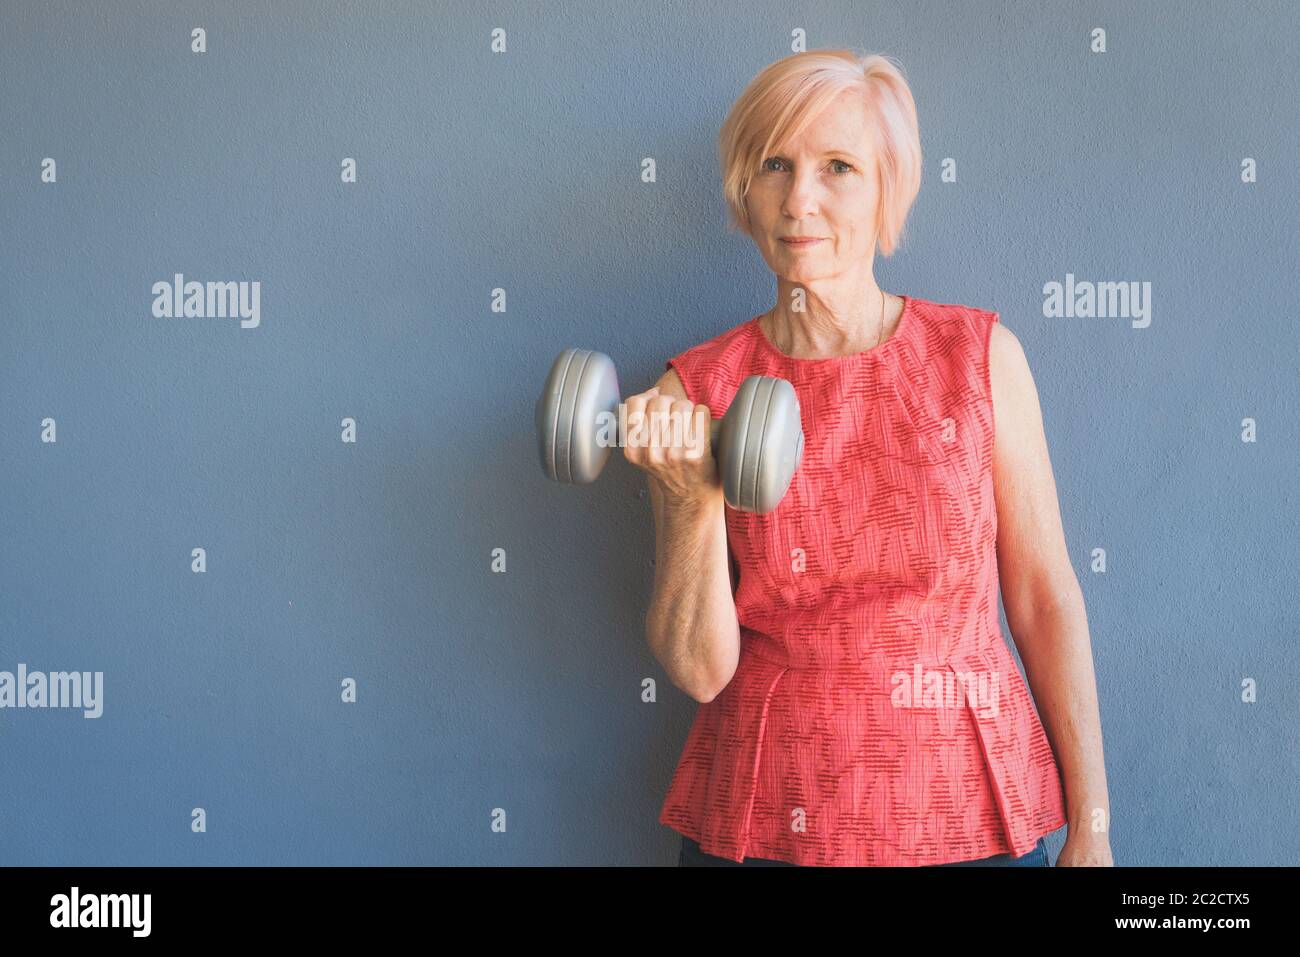 Mature woman keeping fit by lifting weights at home Stock Photo